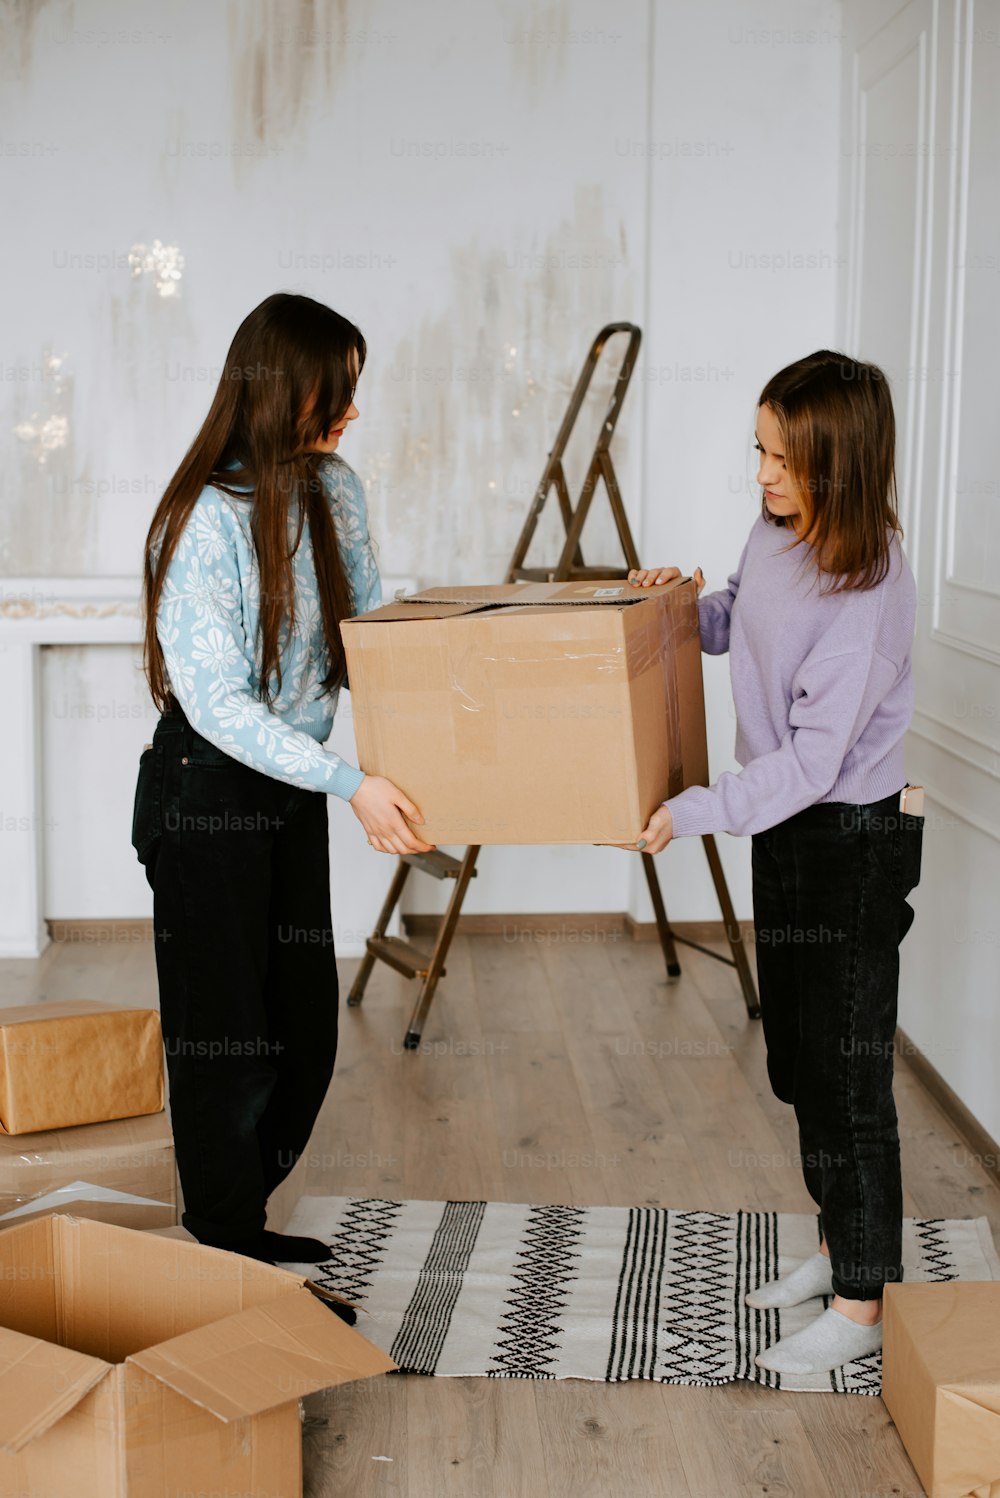 two young women unpack boxes in a room